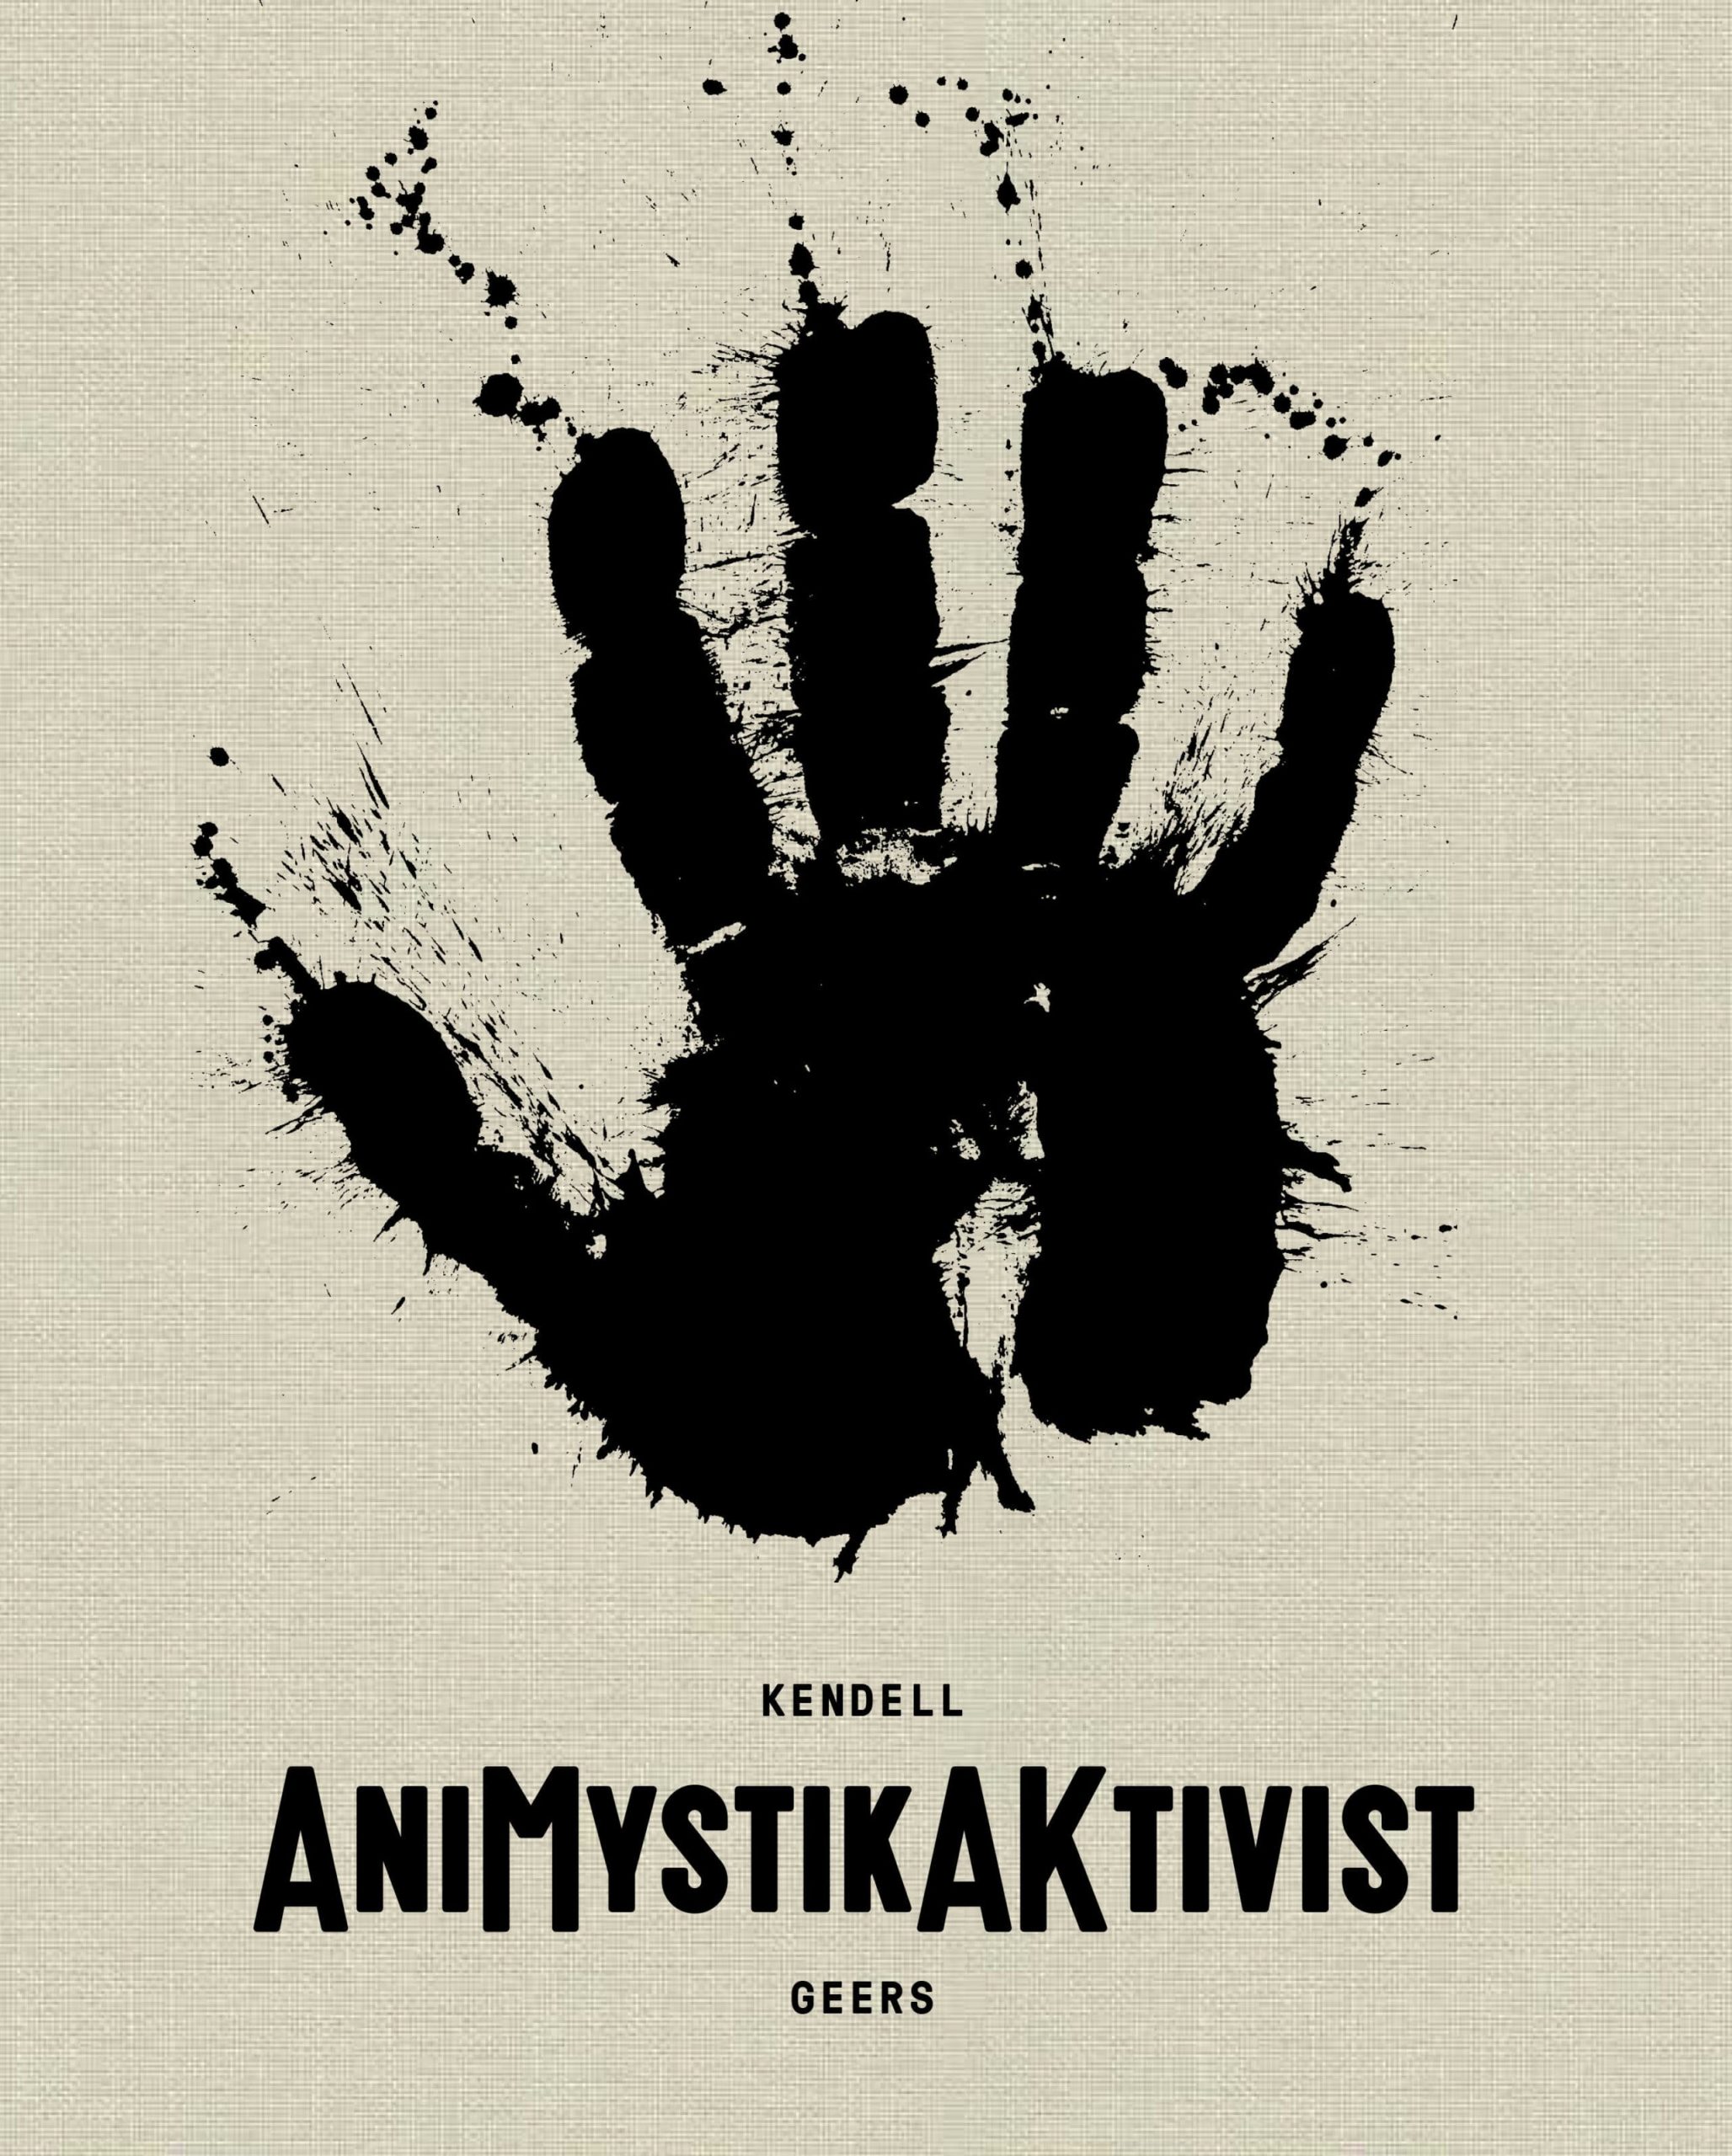 AniMystikAKtivist: A lecture and book launch by Kendell Geers